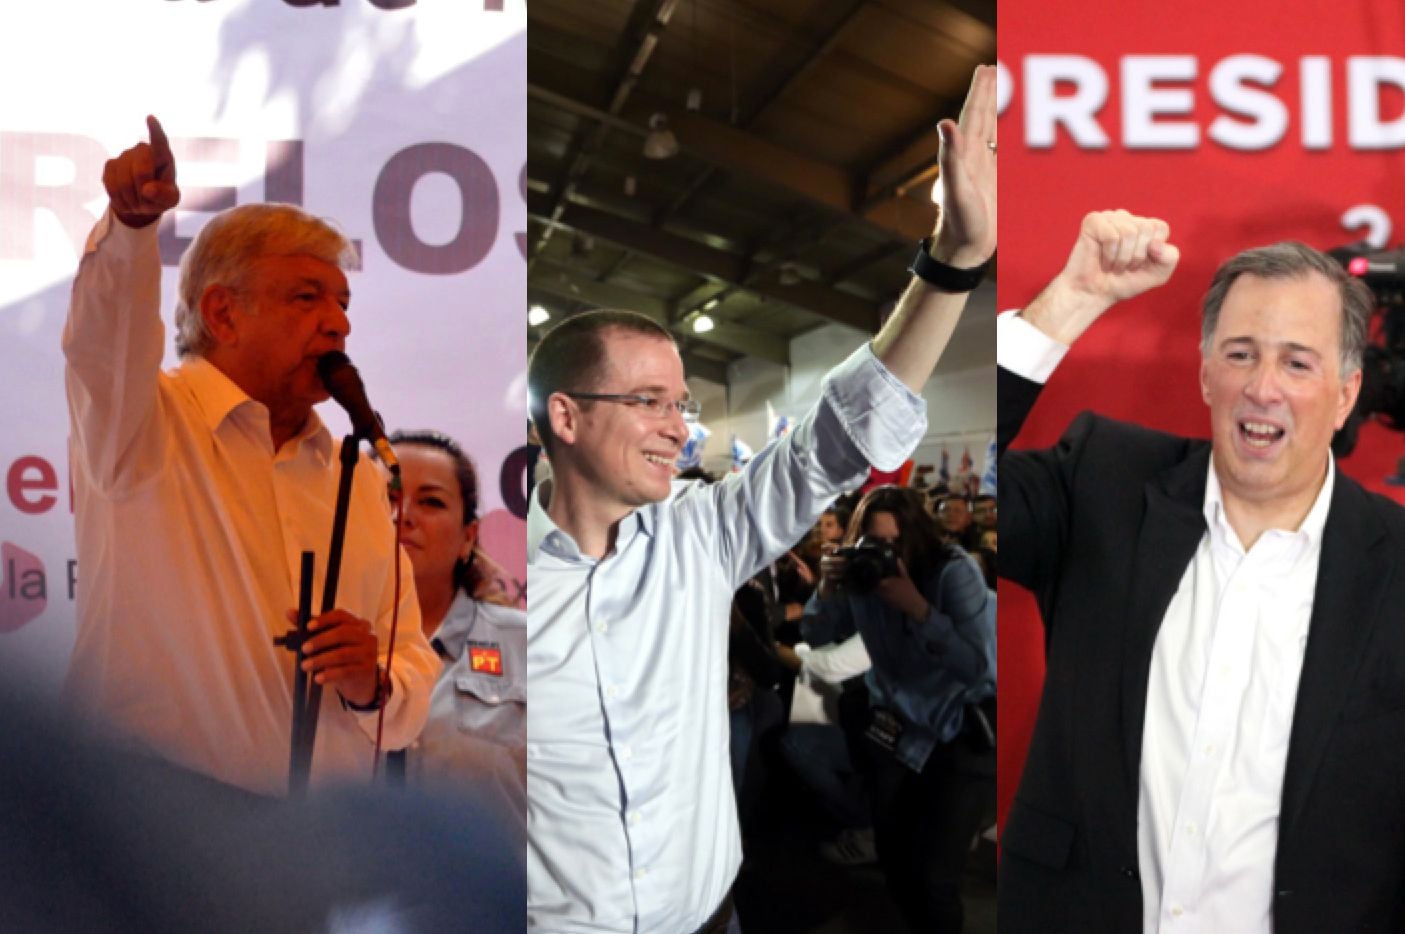 Andrés Manuel López Obrador (left), who has run twice before and is now campaigning as the...